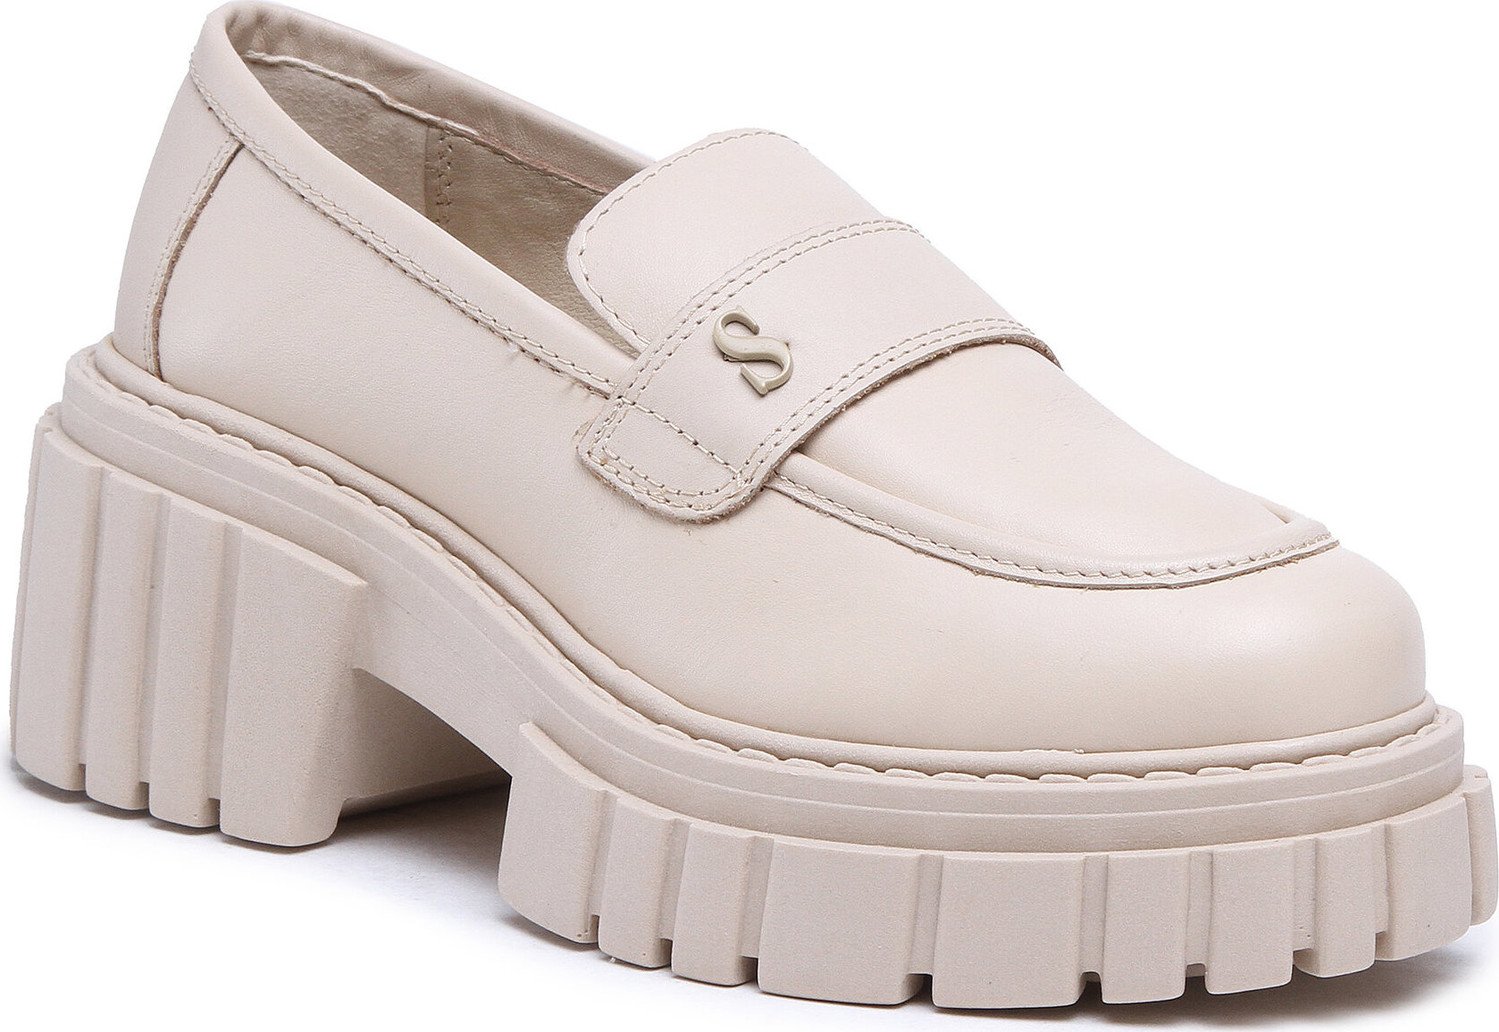 Loafersy Simple SL-43-02-000114 103